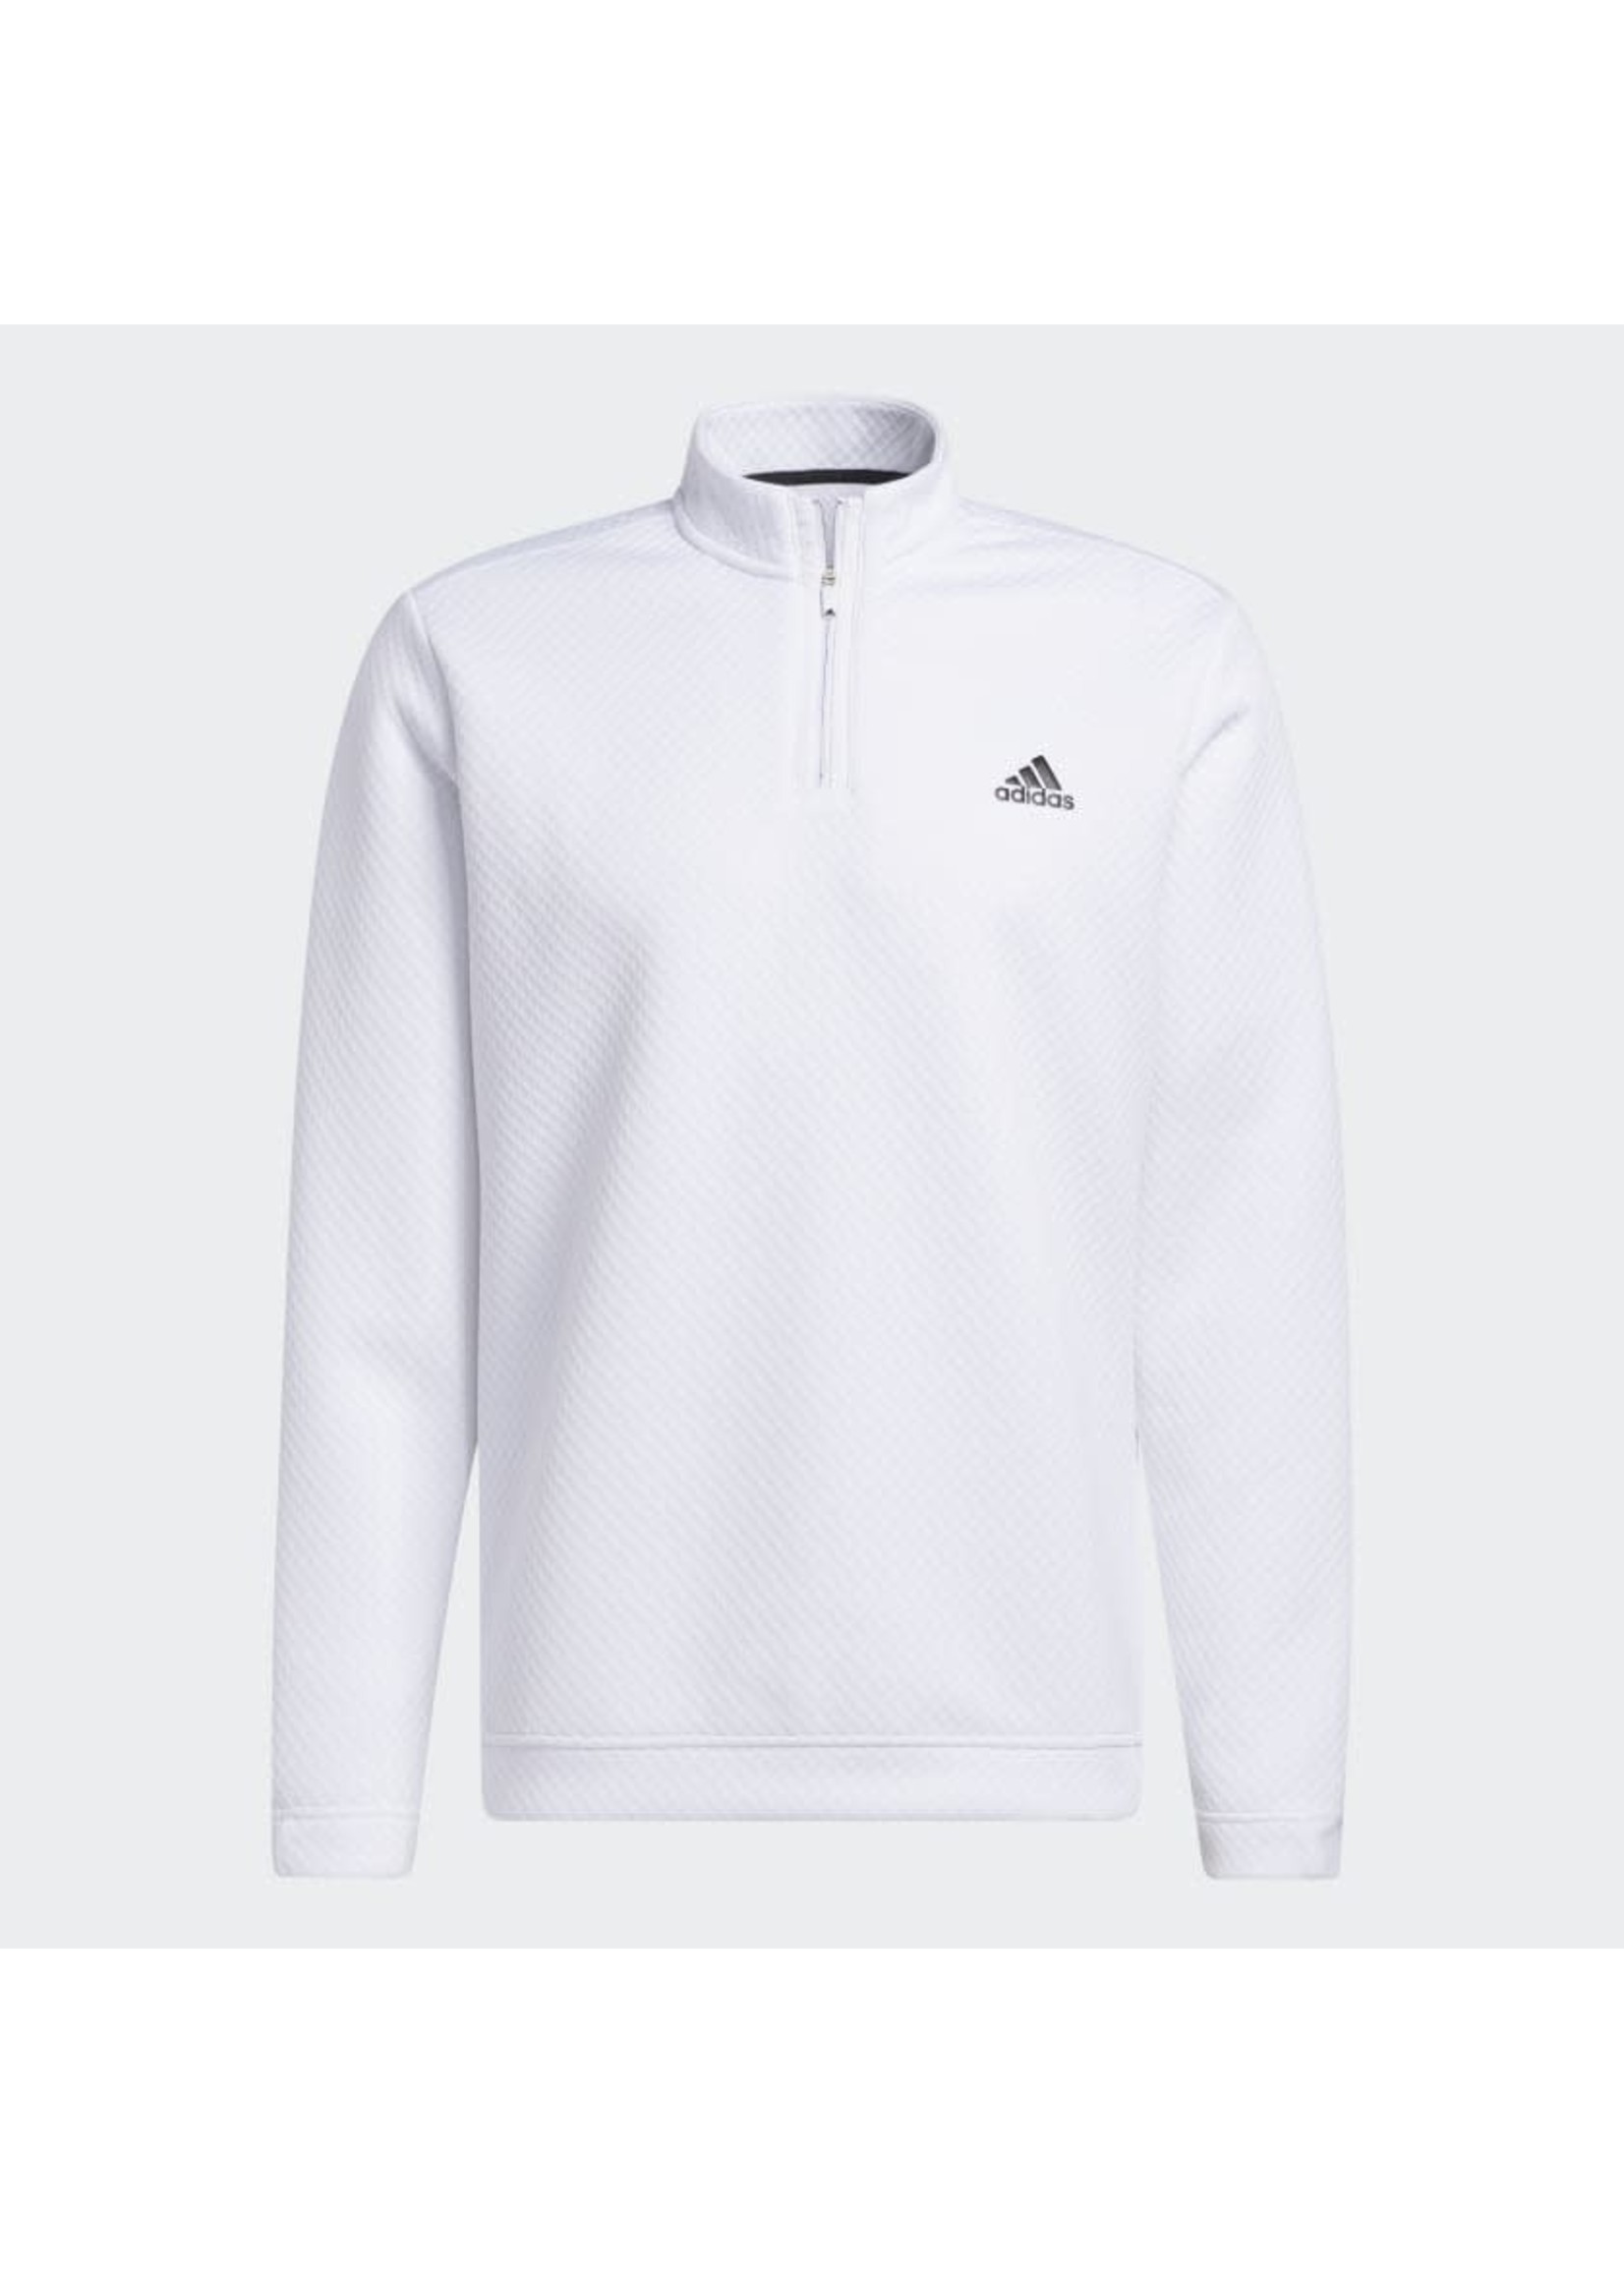 Adidas Adidas Prime Green Water Resistant Mens Golf Top (2021) - White